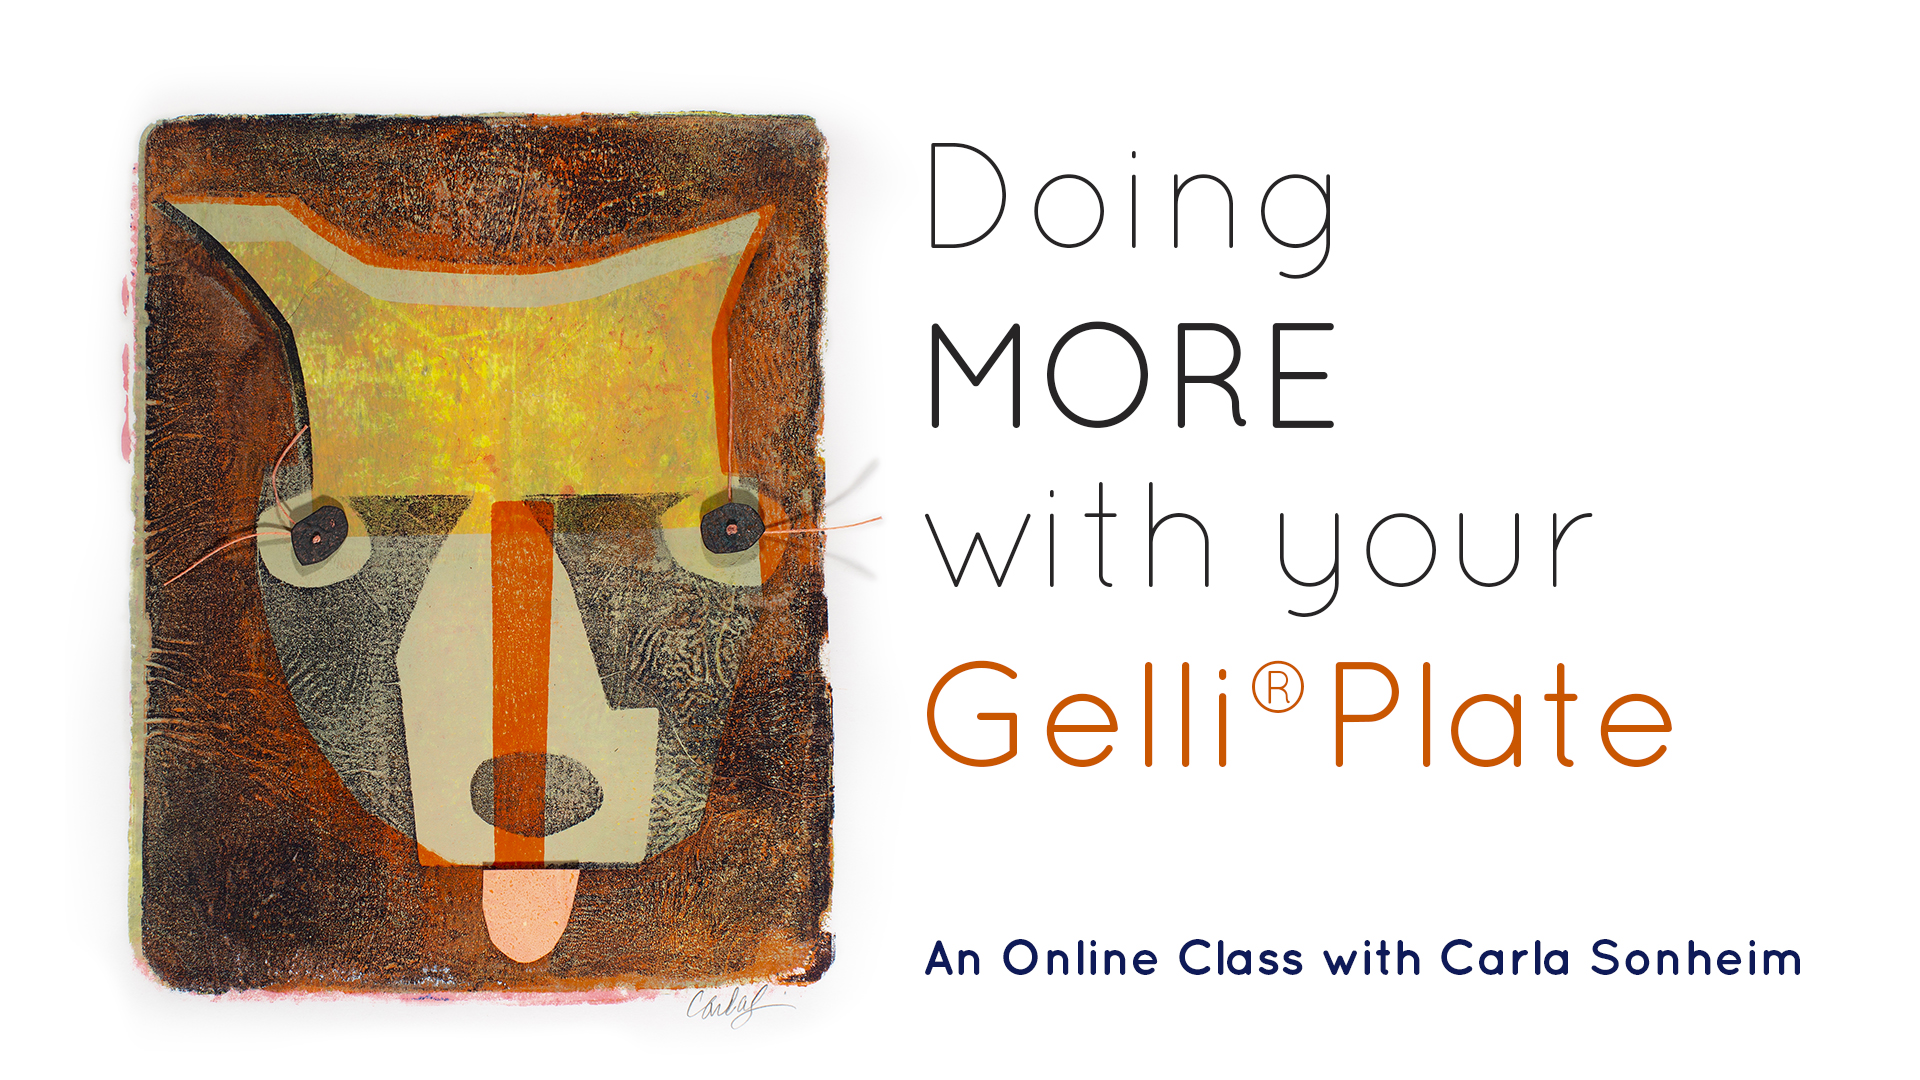 Doing More with your Gelli Plate - Carla Sonheim Presents